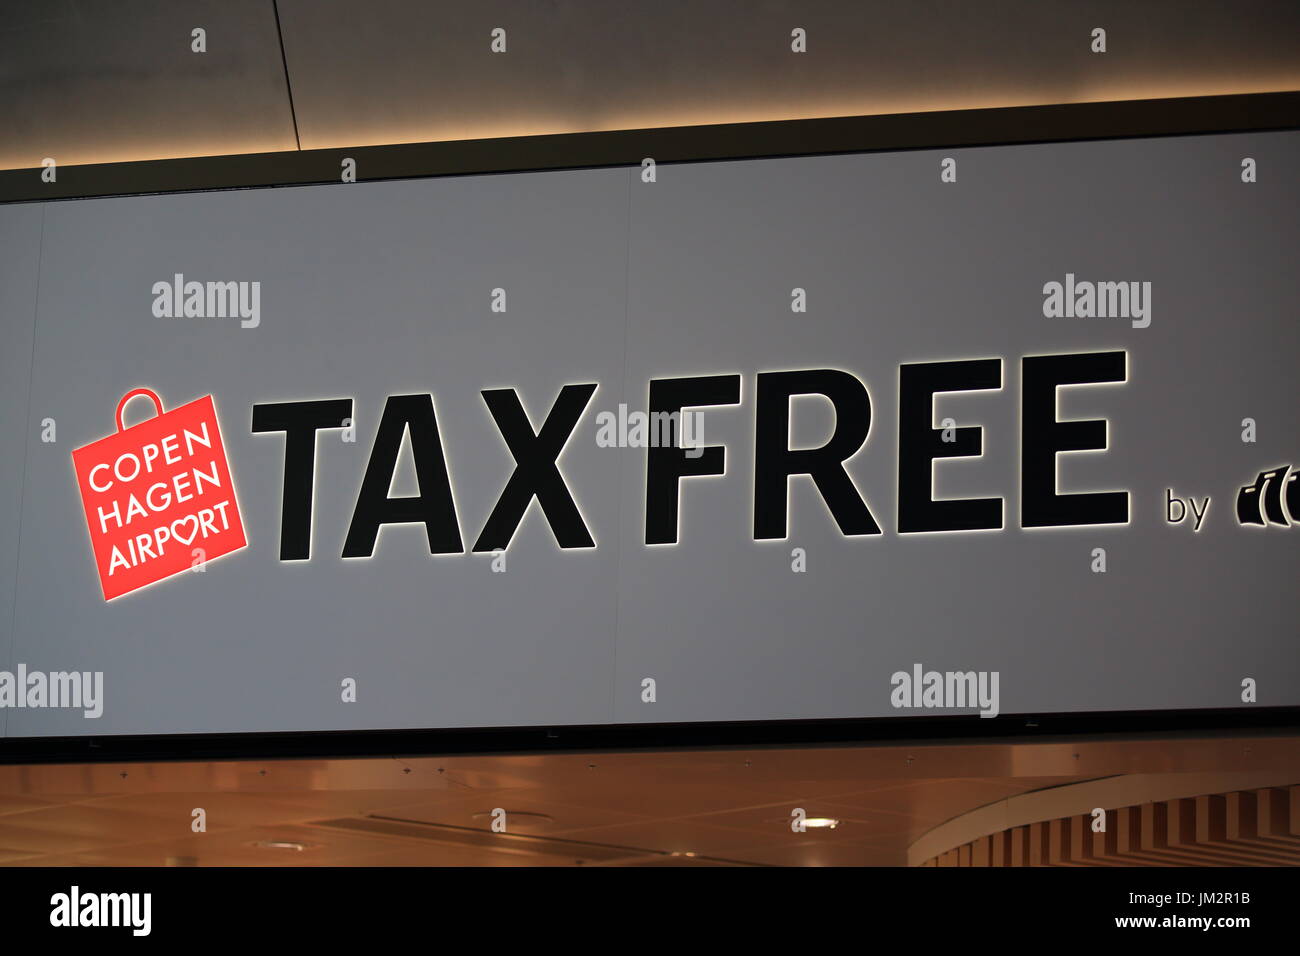 Copenhagen airport, Denmark - July 15, 2017: Tax free electronic sign in airport close-up. Stock Photo